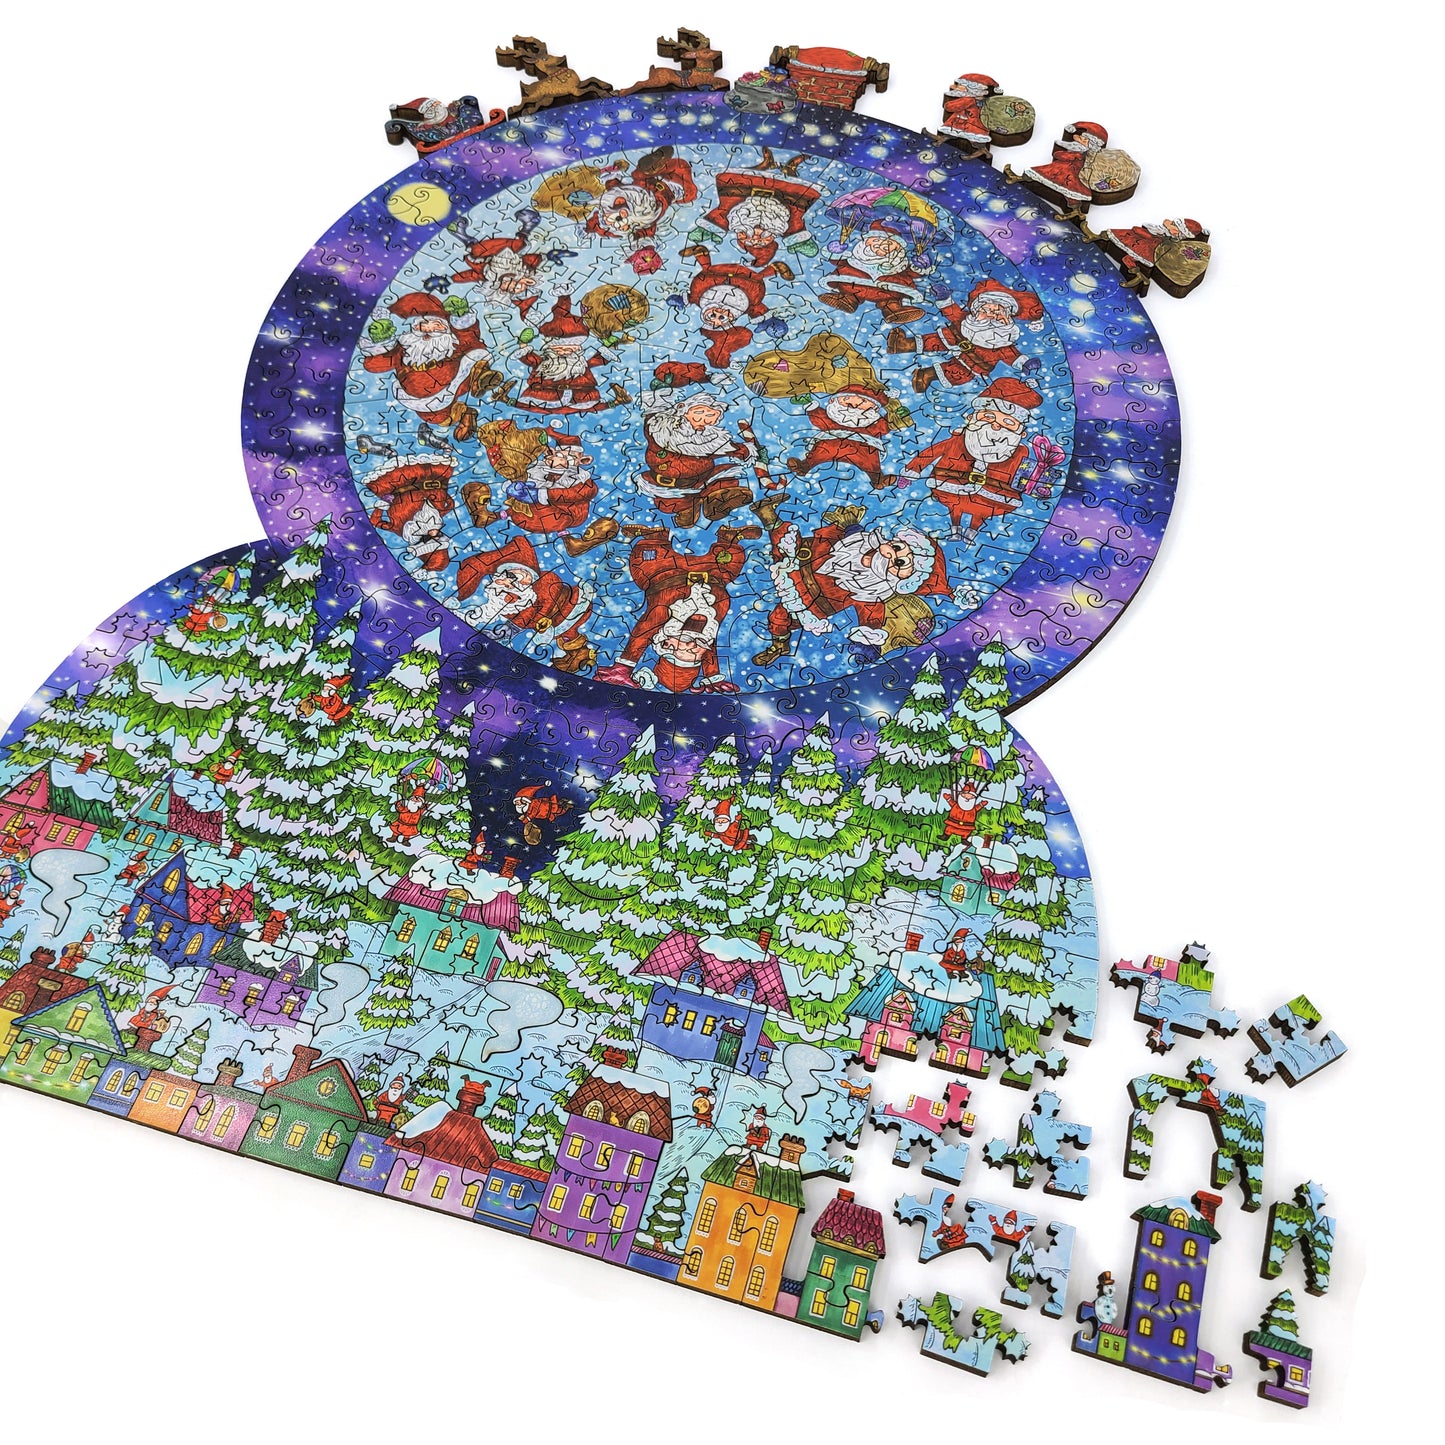 Wooden Jigsaw Puzzle with Uniquely Shaped Pieces for Adults - 340 Pieces - Santa Snow Globe